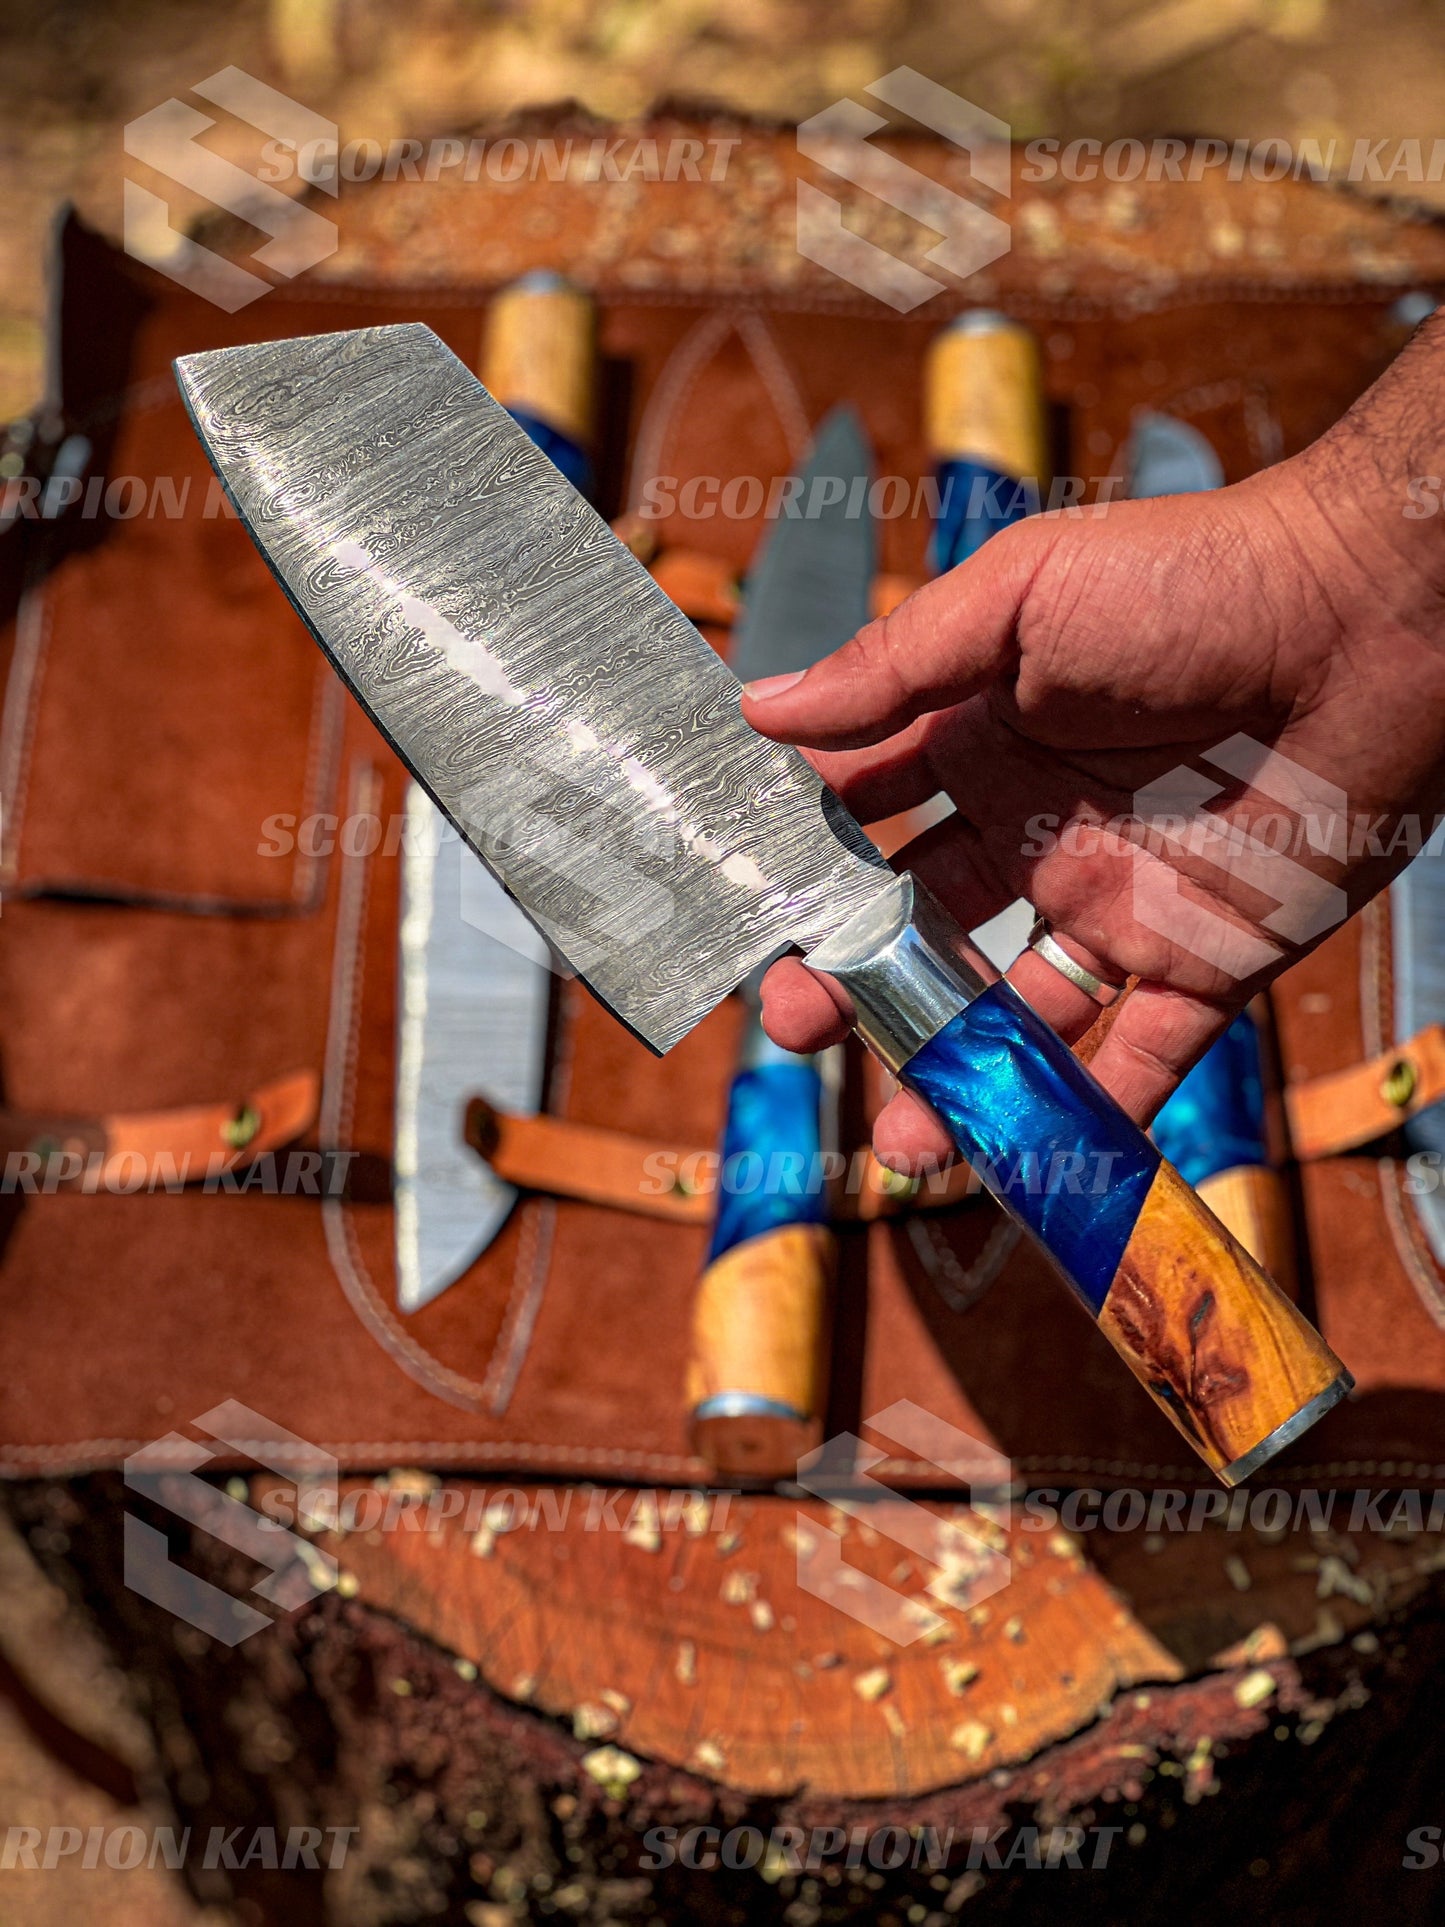 Handmade Damascus Chef Knife Set, 6 Pieces Damascus Steel Chef Knife Set, Kitchen Knife Set with Leather Cover - Premium best Happy Valentine Day gift from SCORPION KART - Just $250! Shop now at SCORPION KART